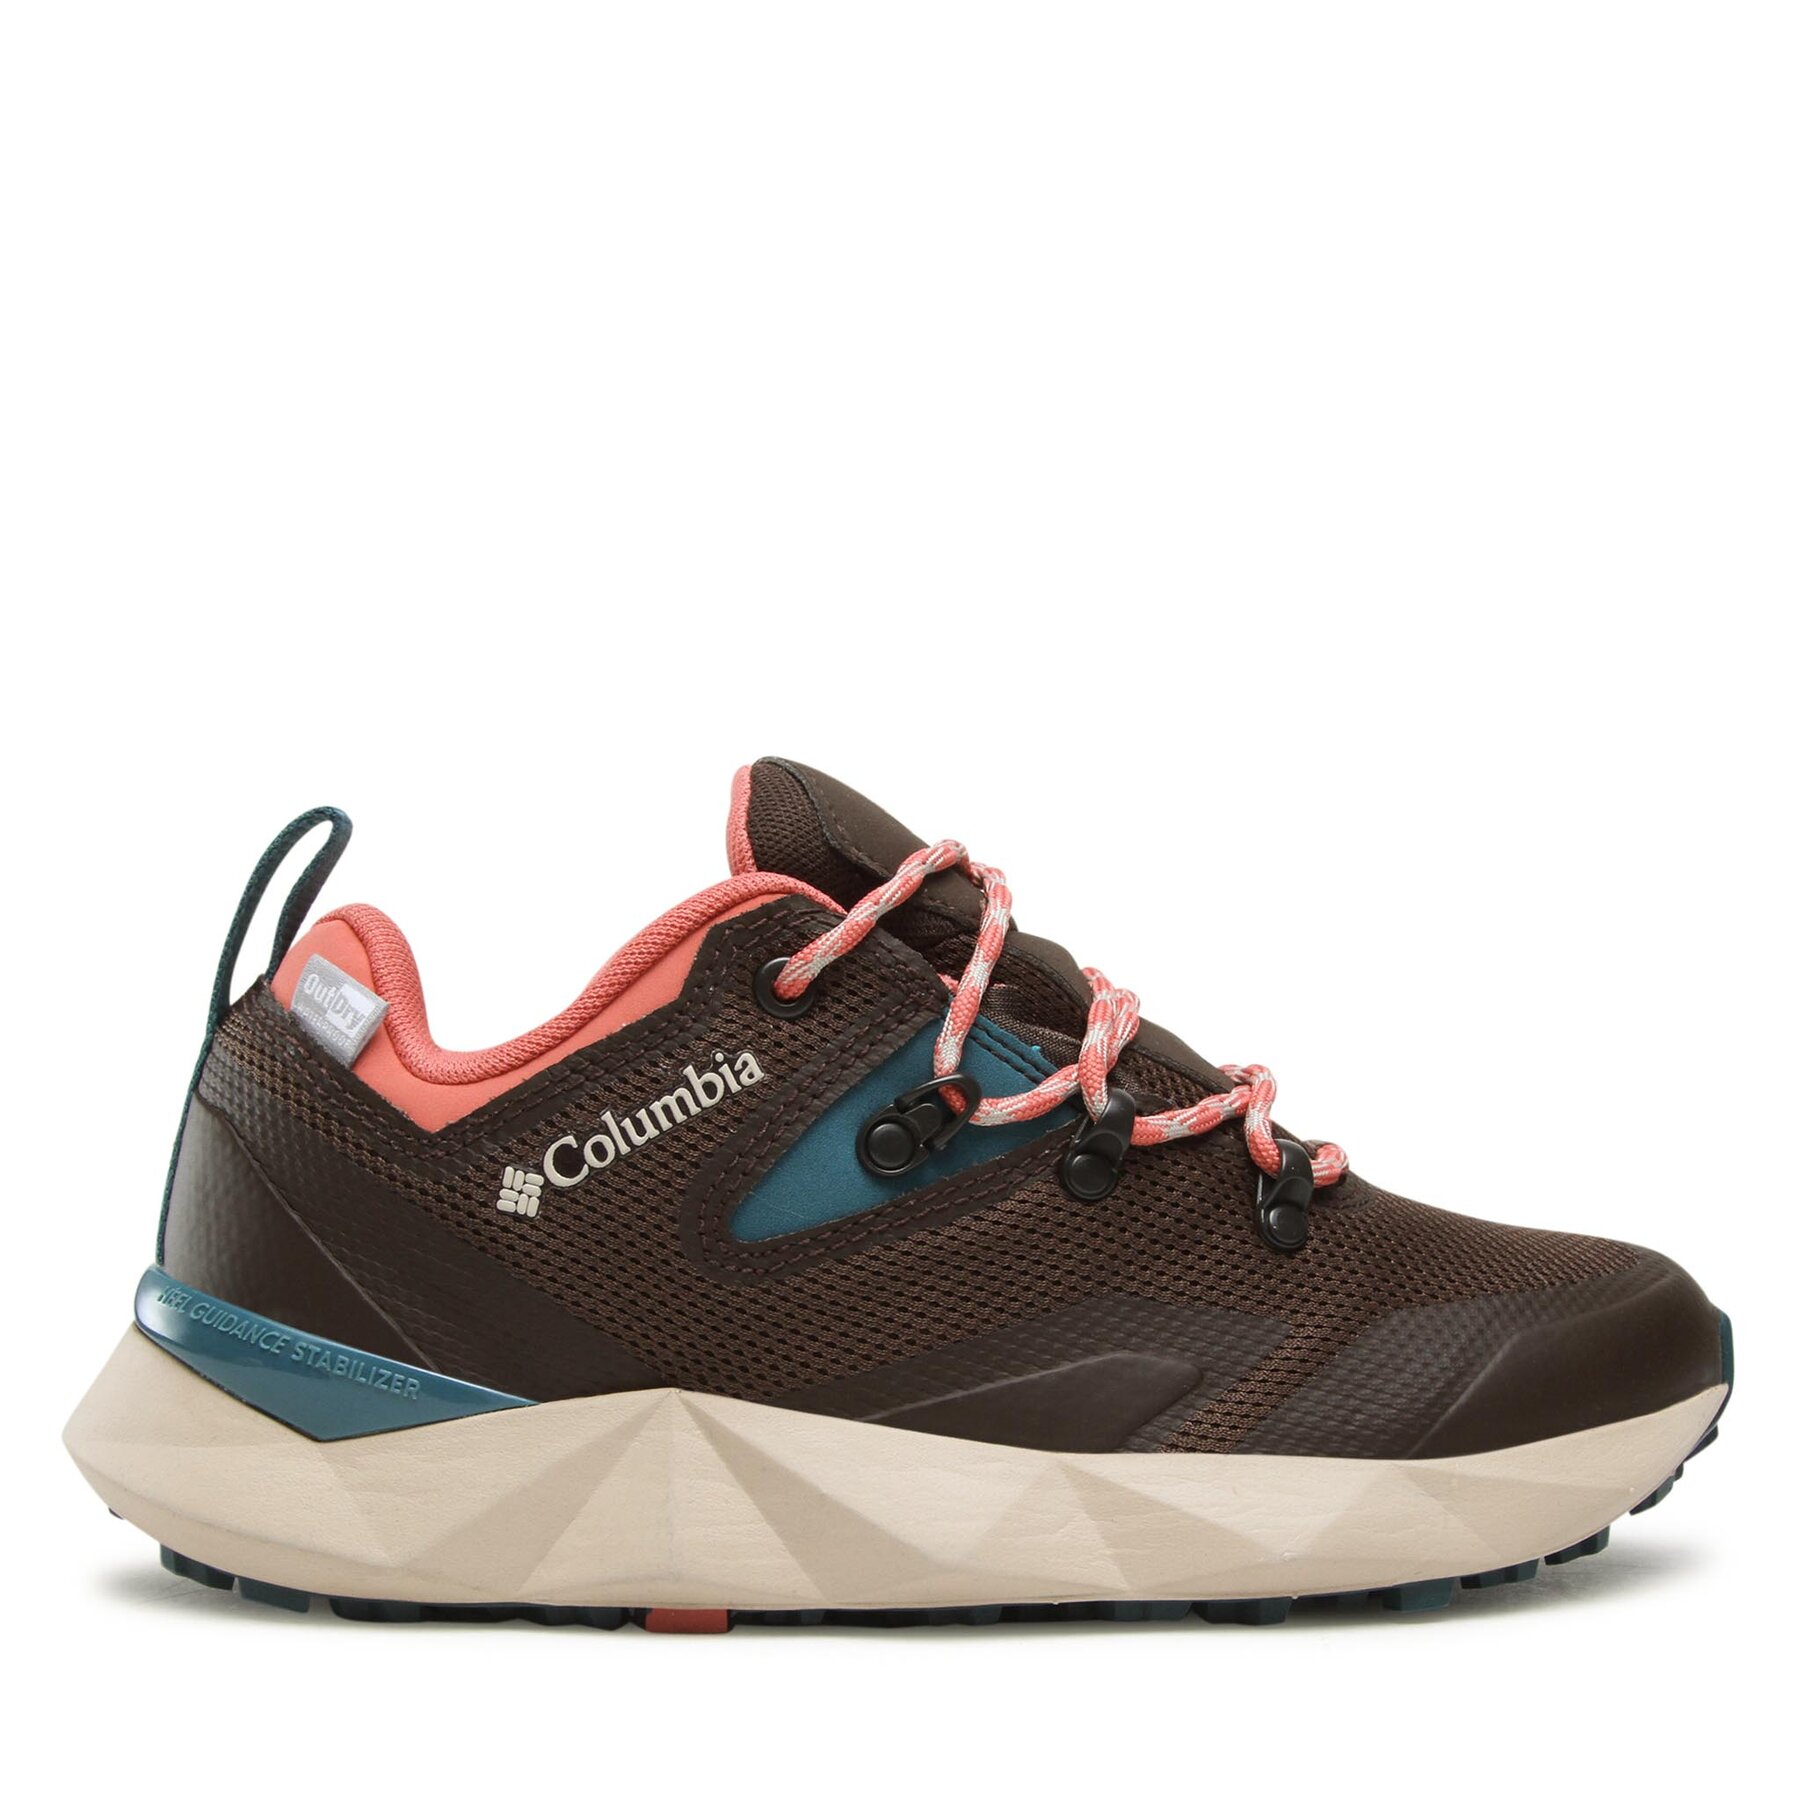 Trekkingschuhe Columbia Facet 60 Low Outdry BL1821-231 Cordovan/Ancient Fossil von Columbia